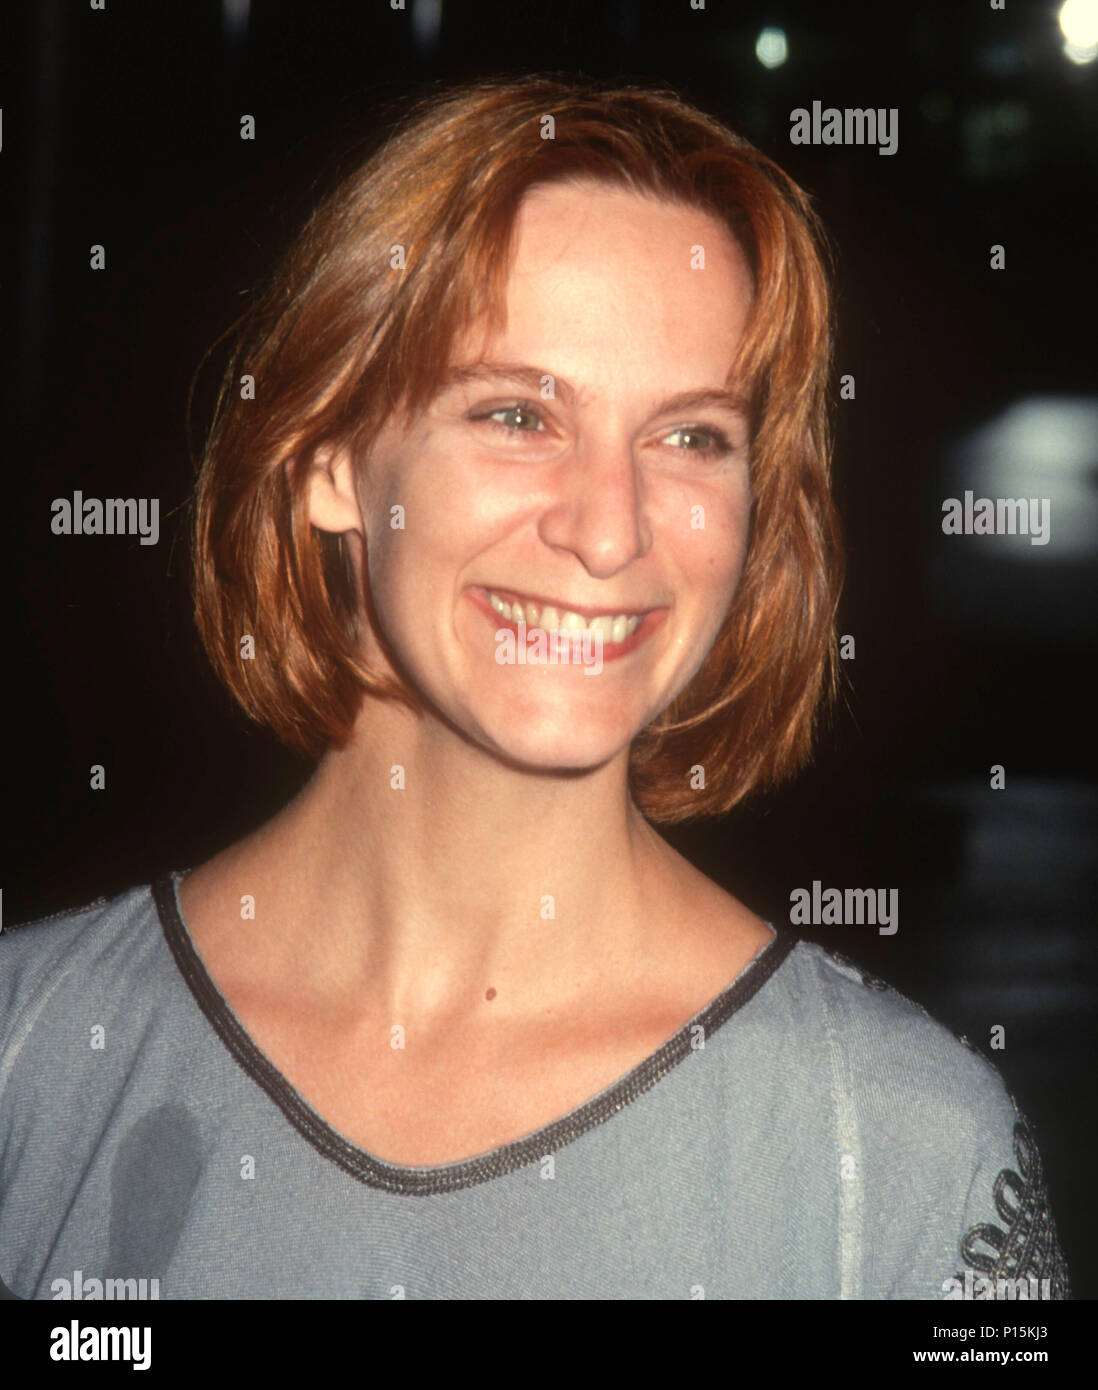 LOS ANGELES, CA - OCTOBER 01: Actress Amanda Plummer attends 'Twenty-One' screening on October 1, 1991 in Los Angeles, California. Photo by Barry King/Alamy Stock Photo Stock Photo